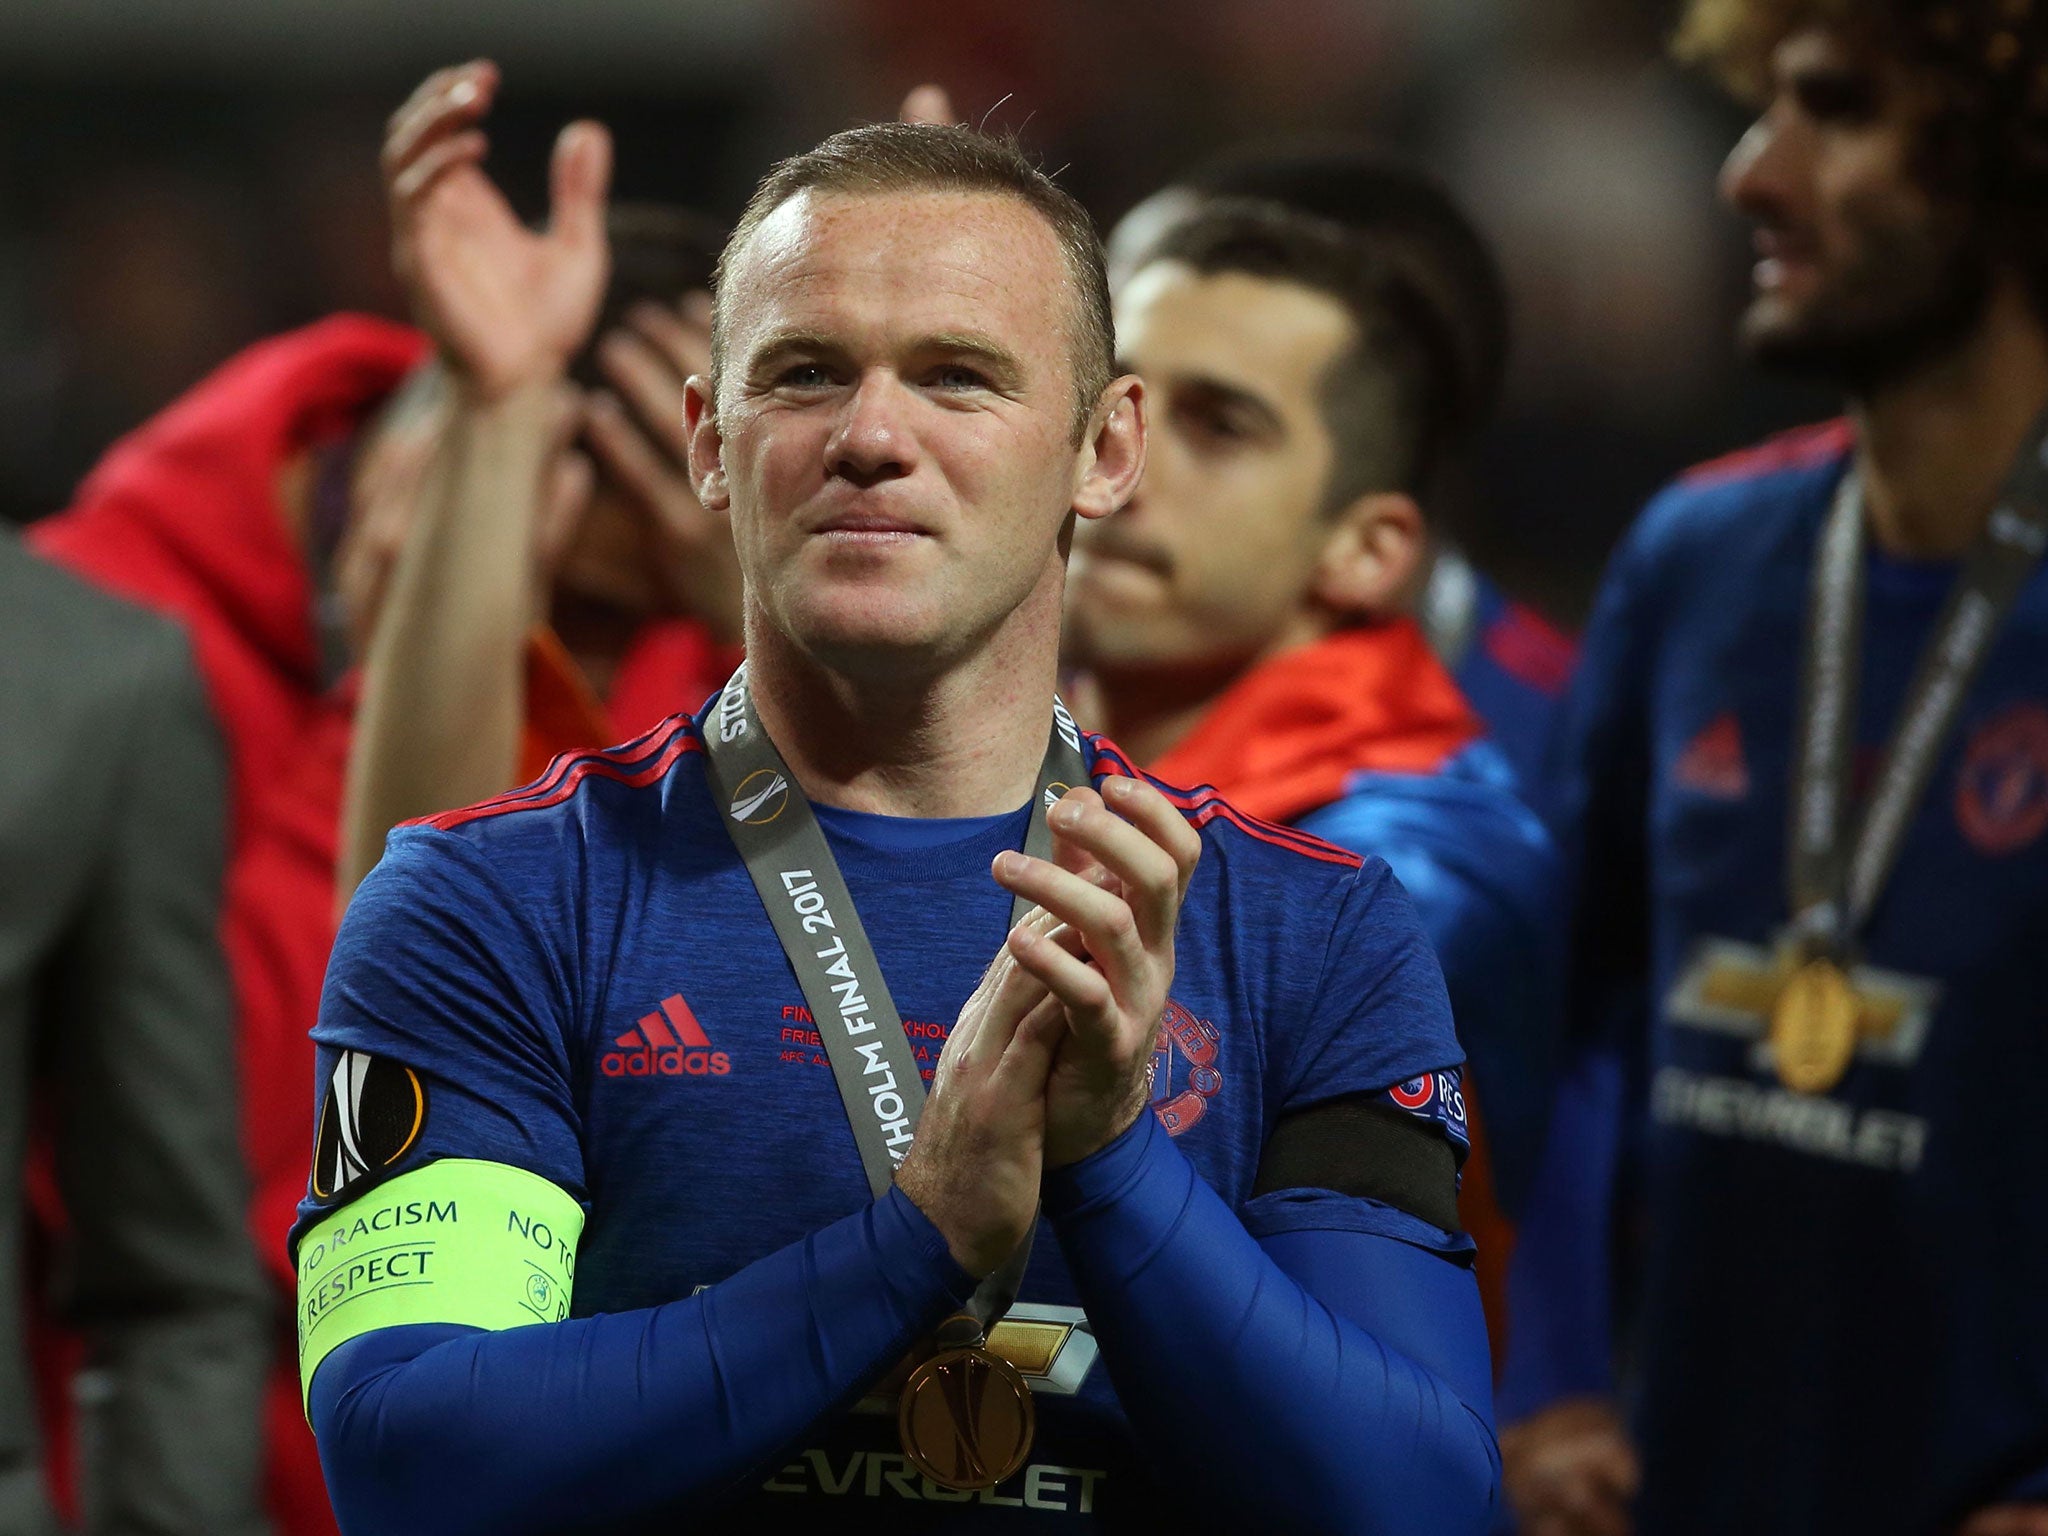 Wayne Rooney celebrates after the final at the Friends Arena